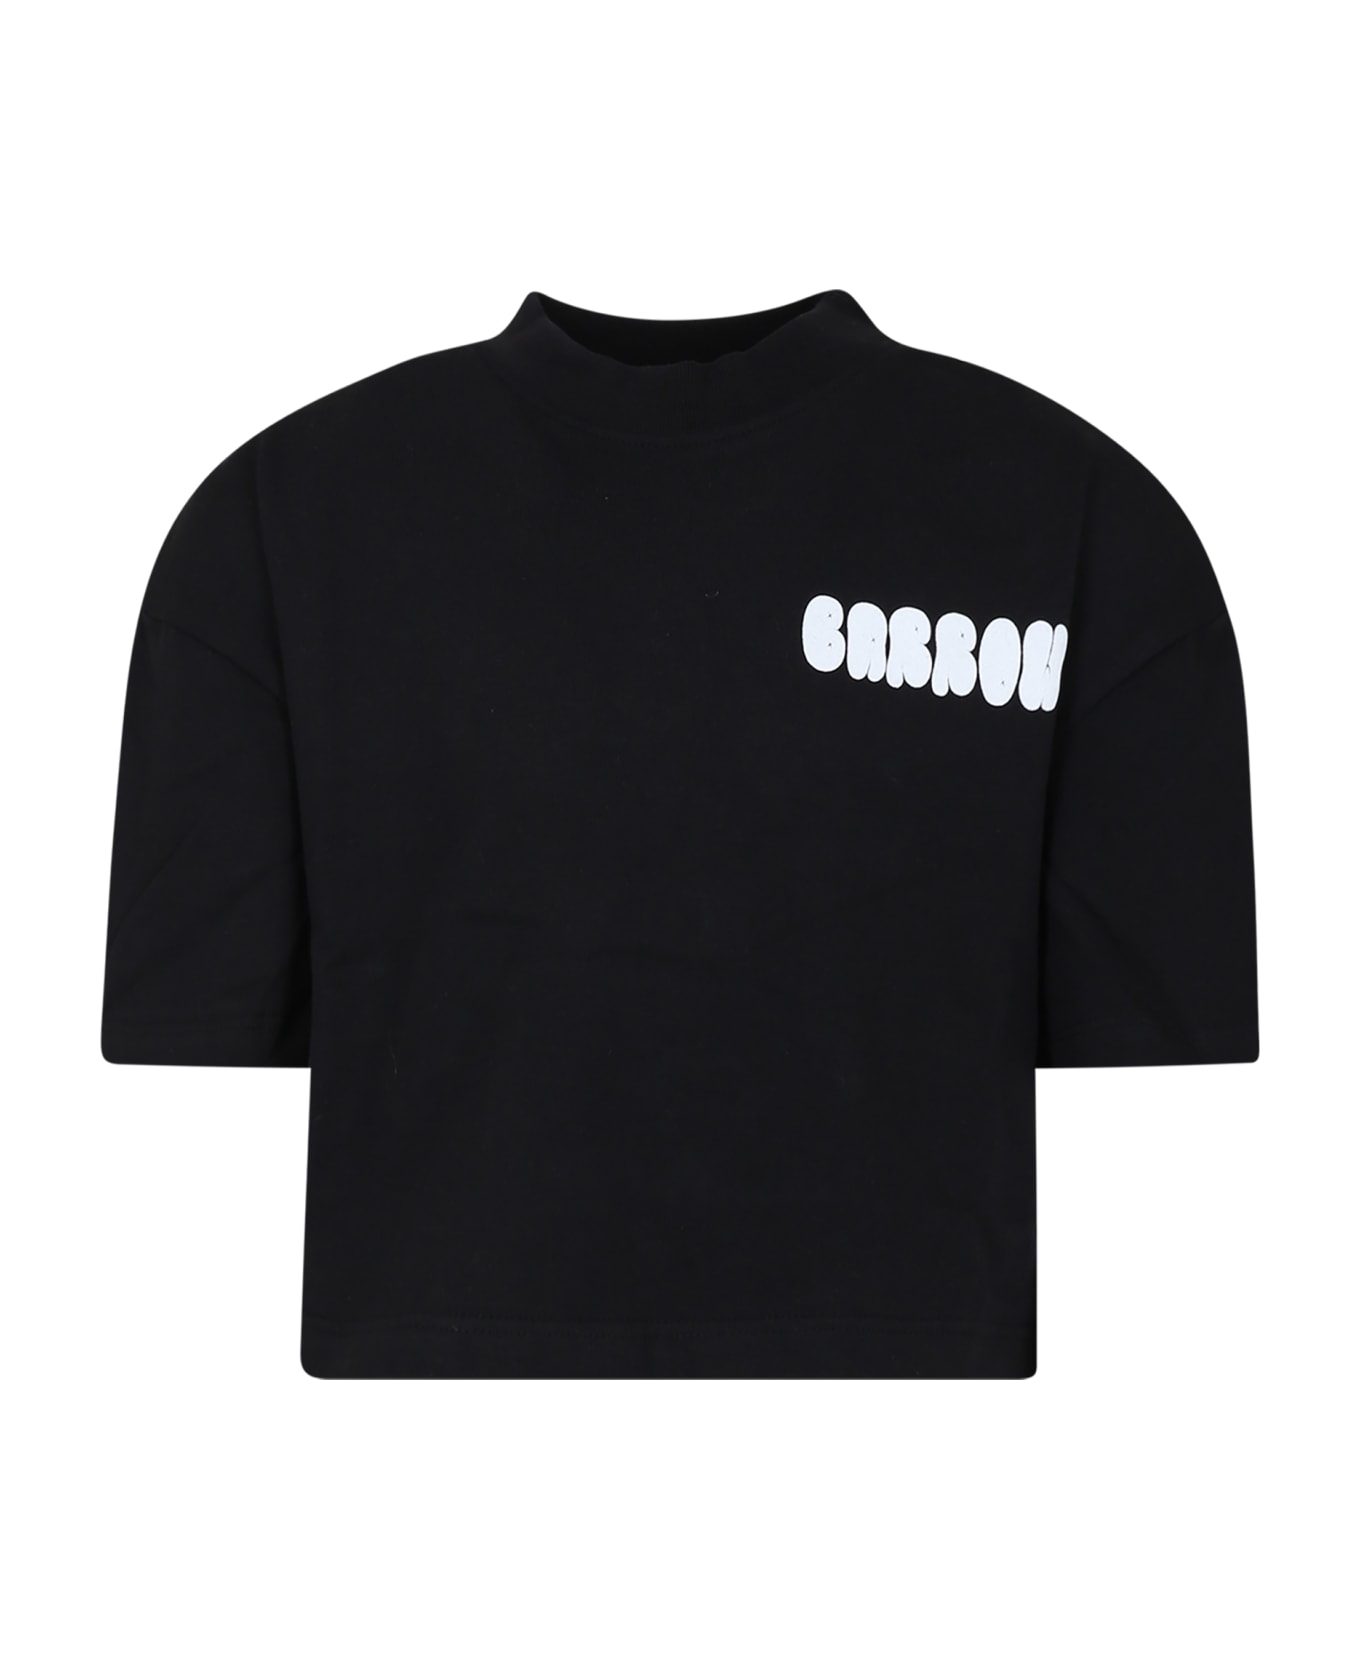 Barrow Black T-shirt For Girl With Logo And Smiley - Nero